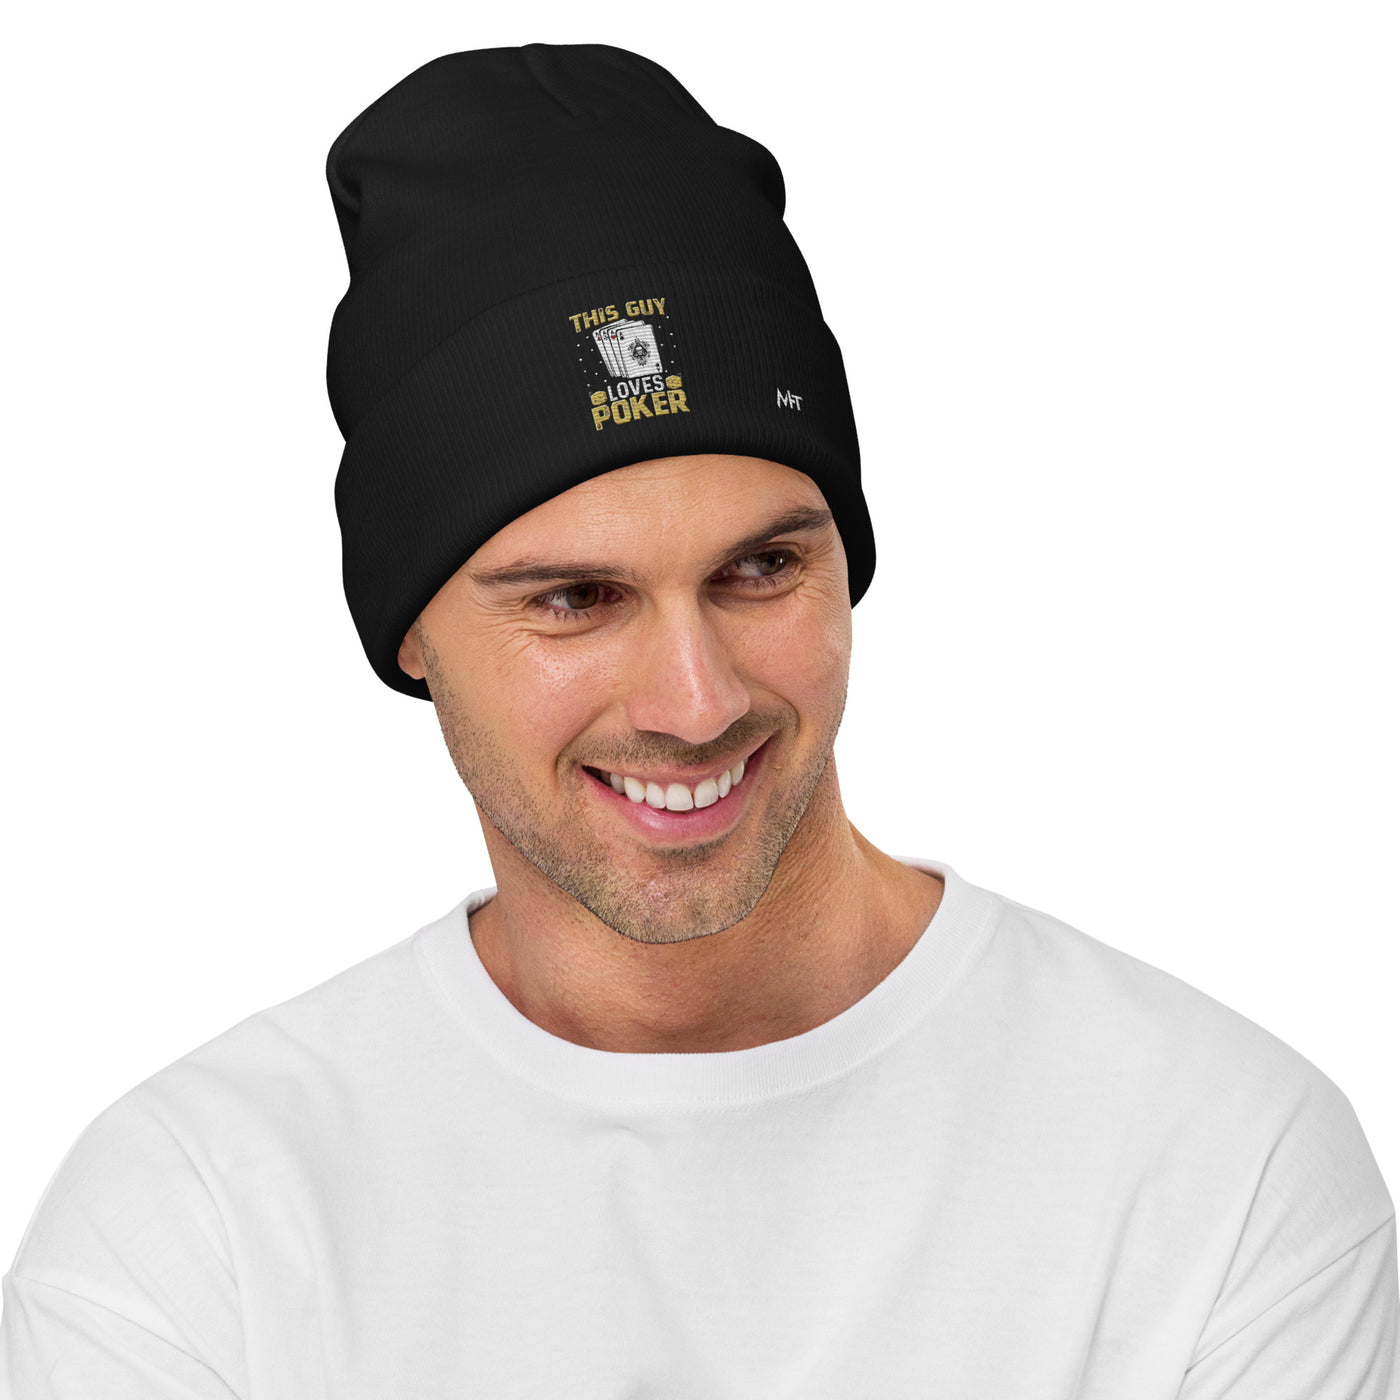 This Guy Loves Poker - Embroidered Beanie